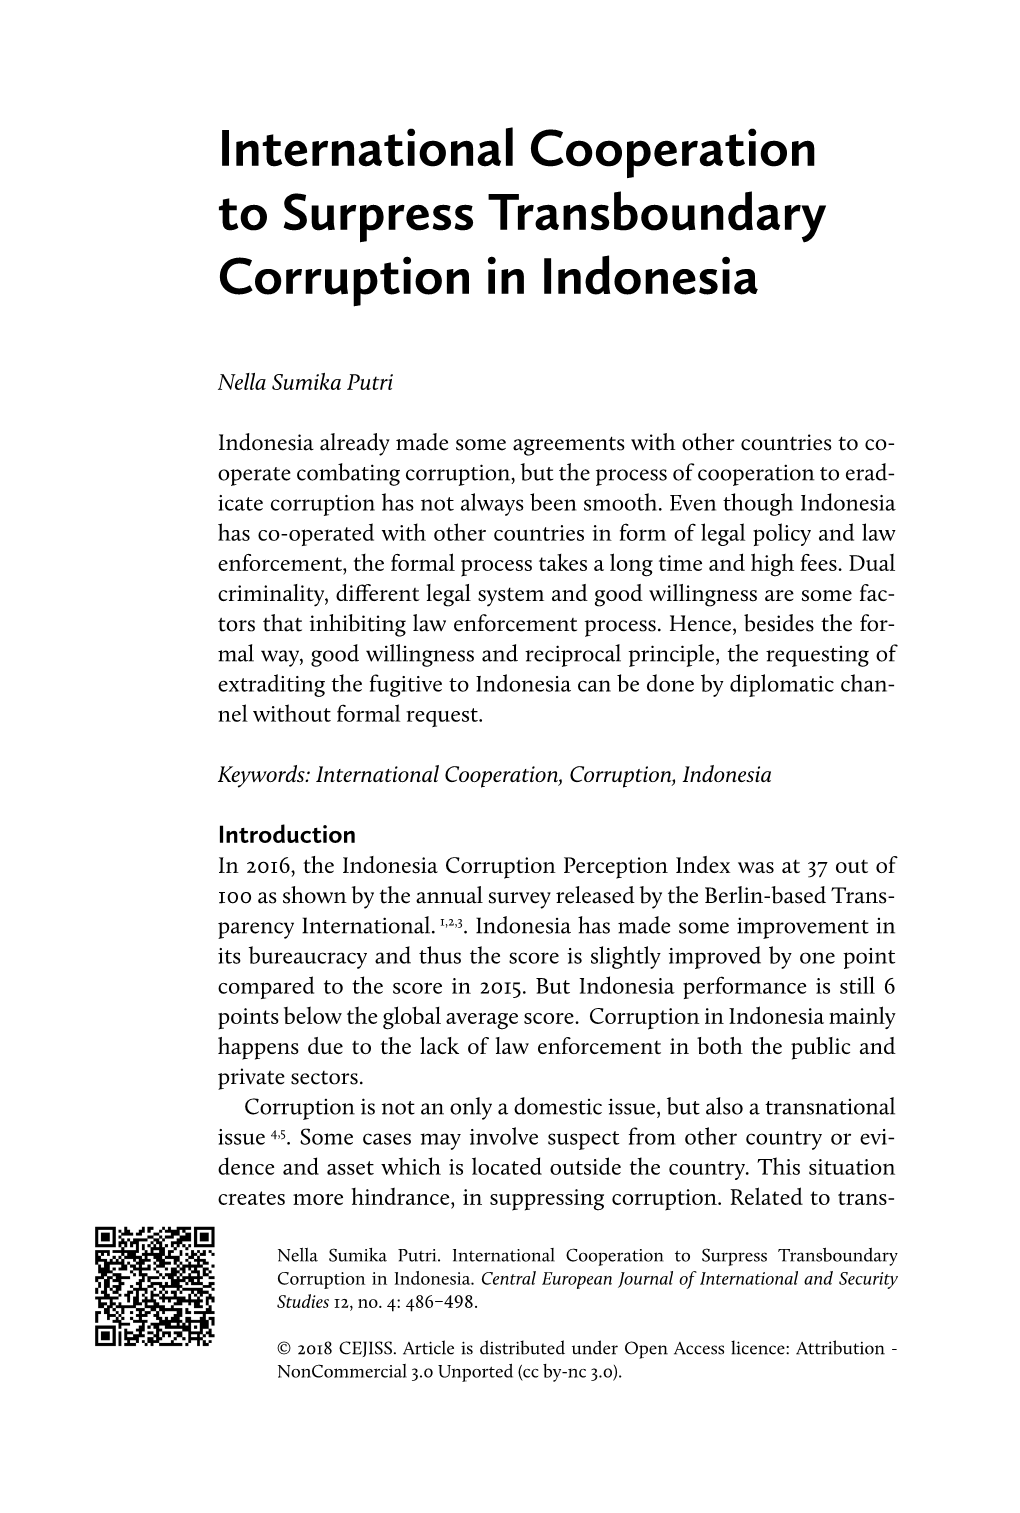 International Cooperation to Surpress Transboundary Corruption in Indonesia